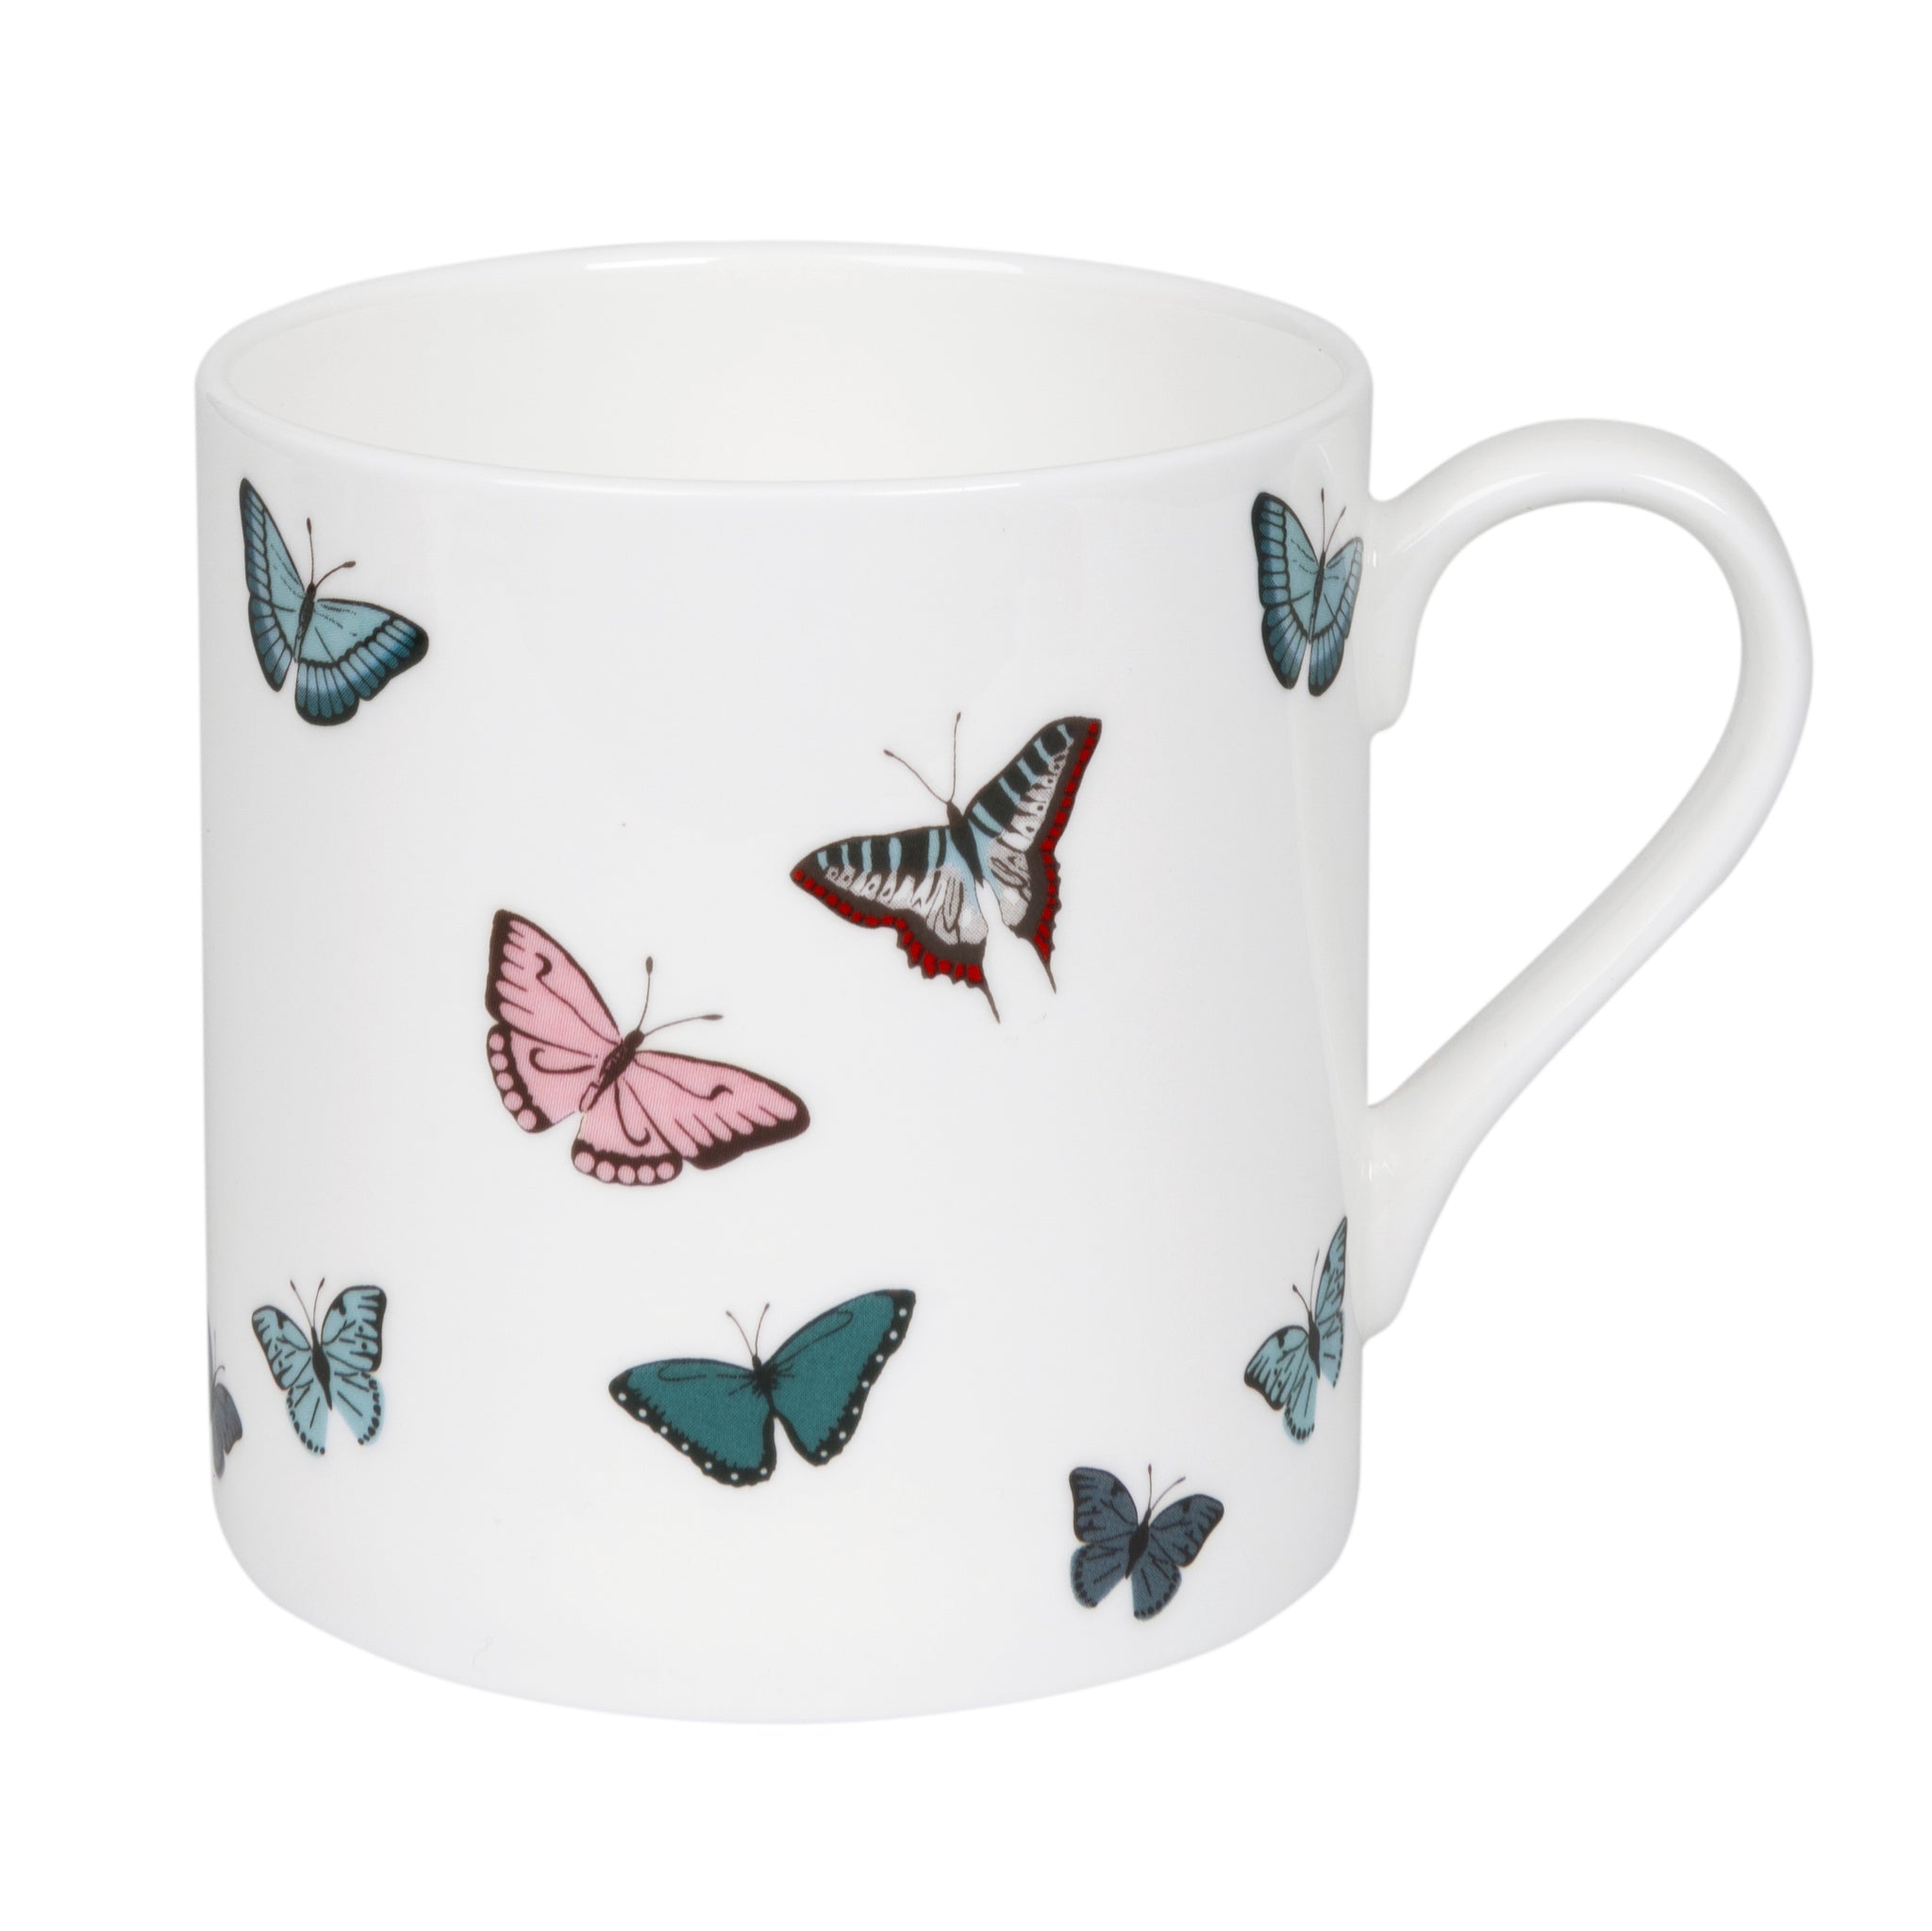 Sophie Allport fine bone china mug covered in colourful butterflies.